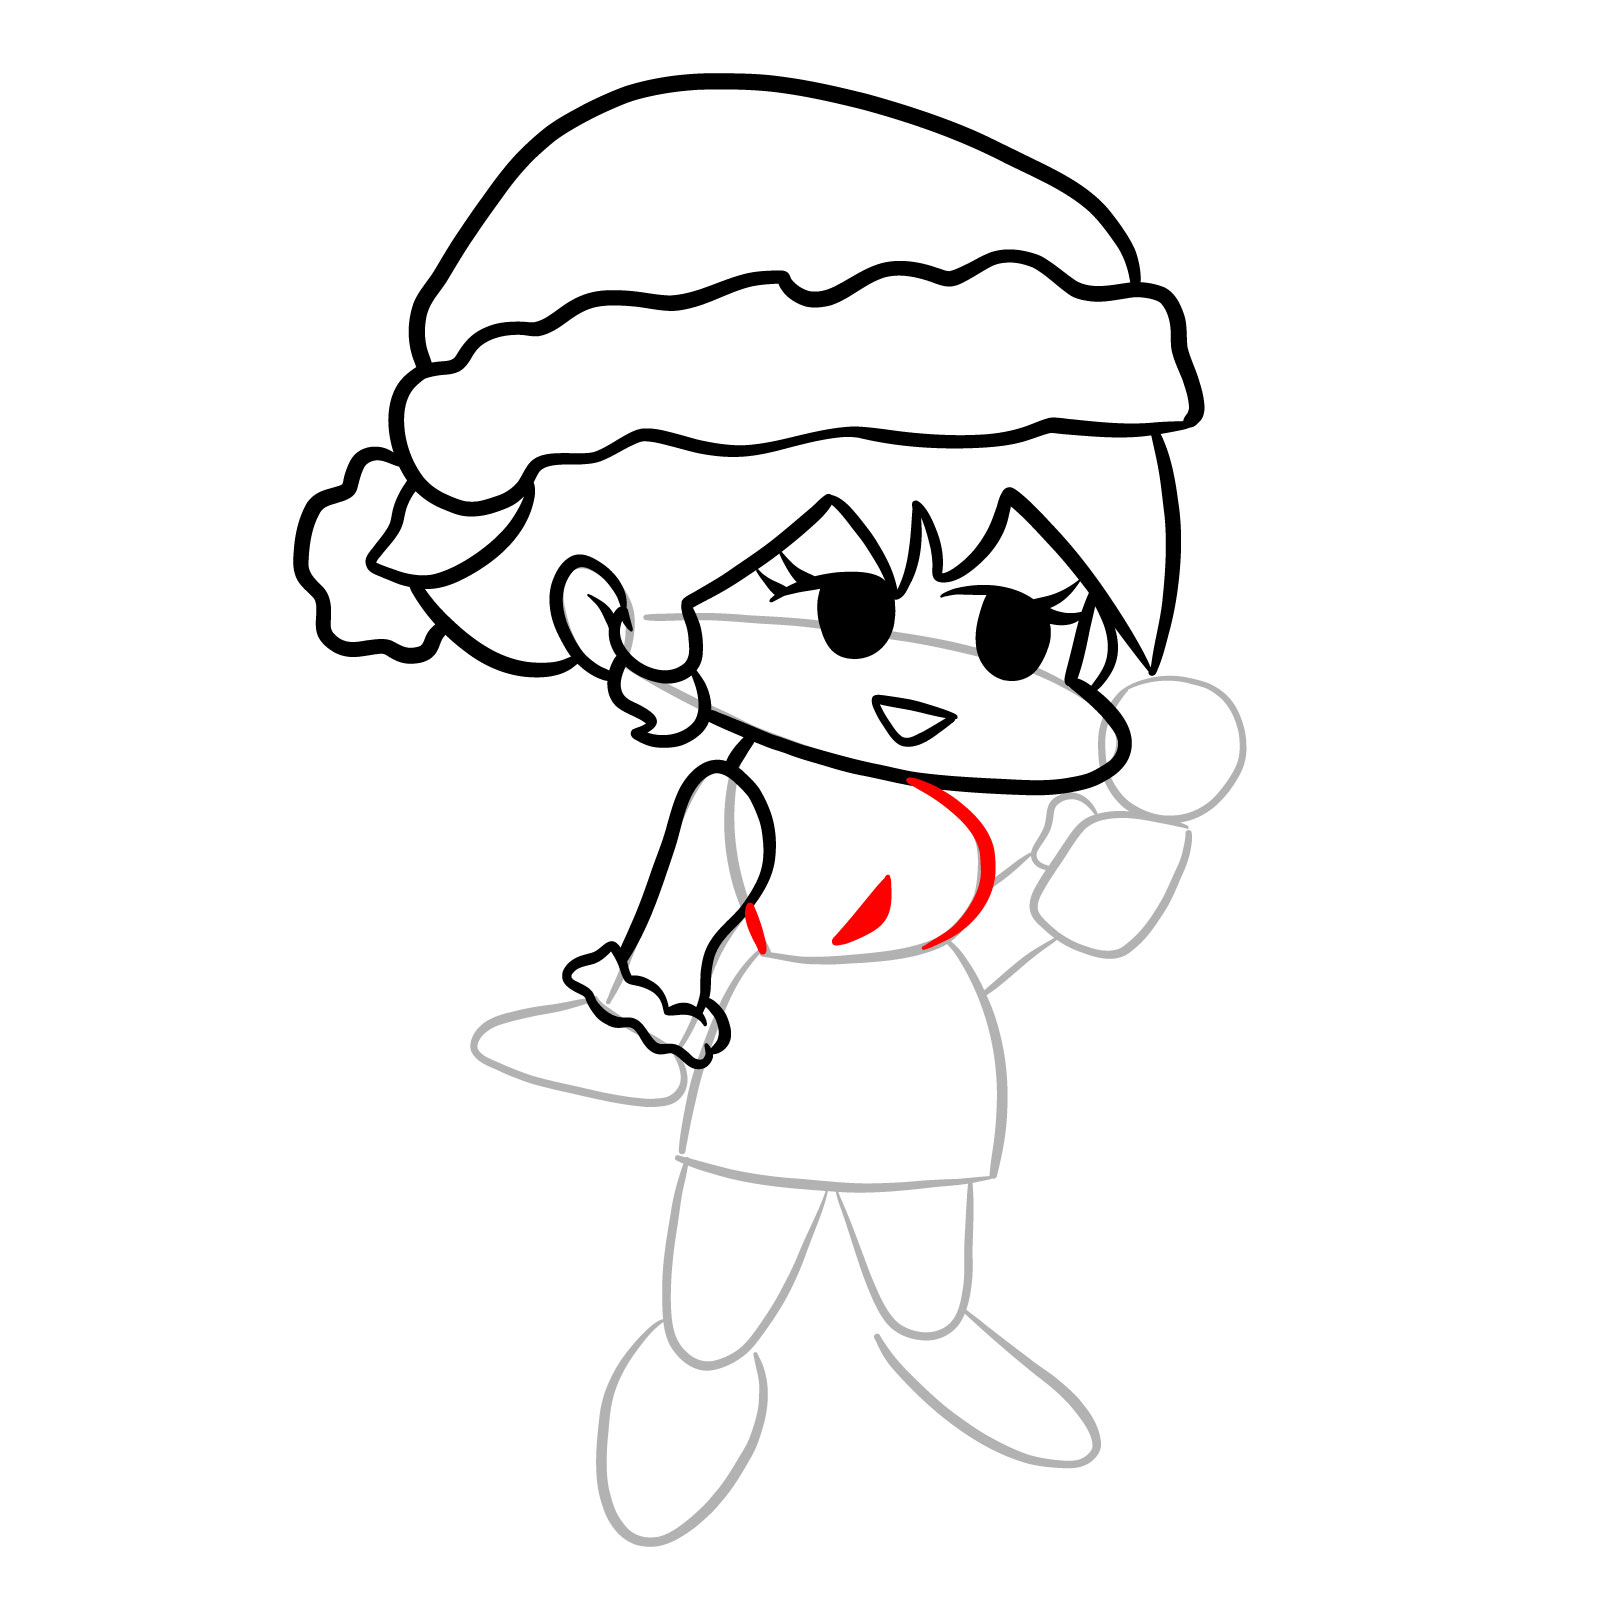 How to draw standing Santa GF - step 15